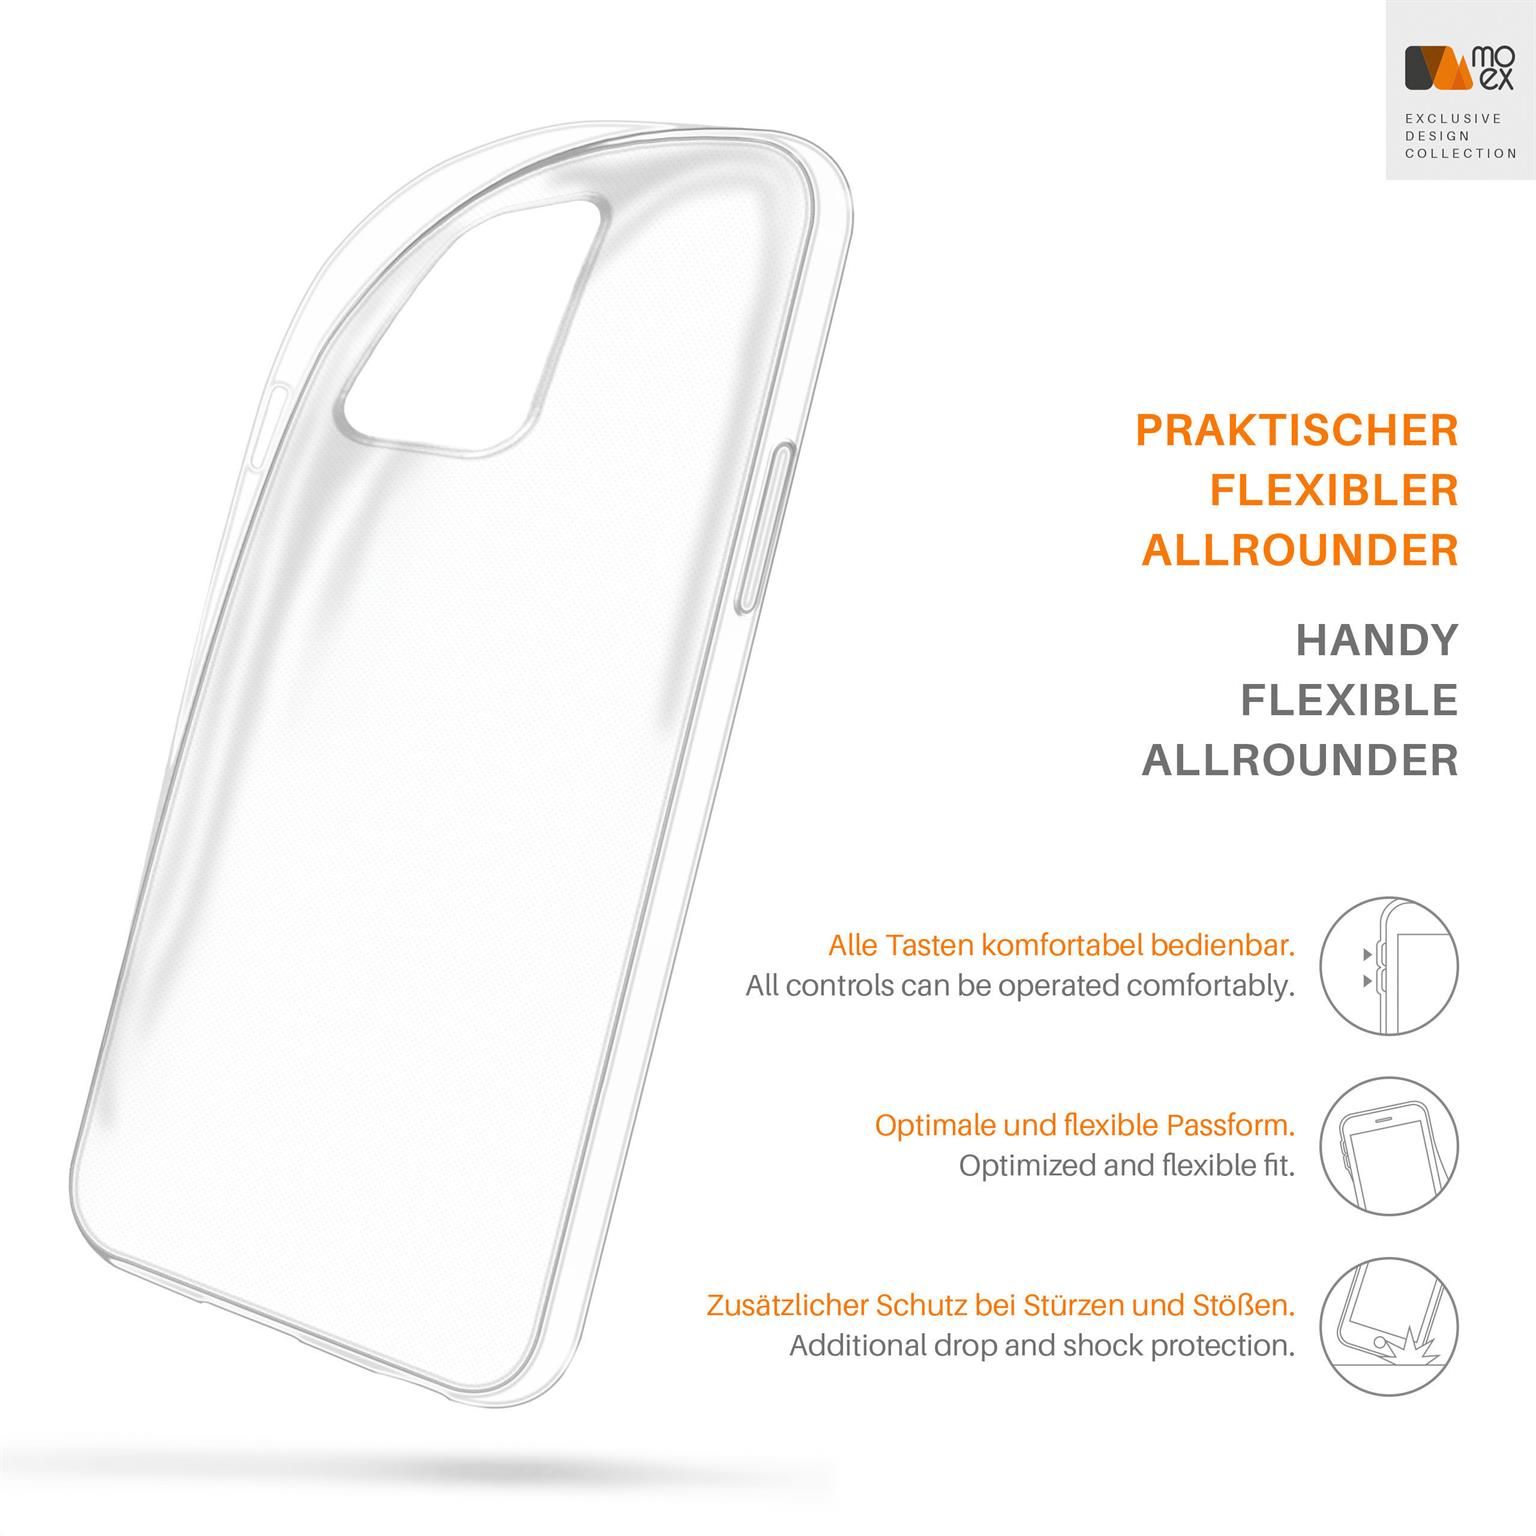 Case, Backcover, 8T, Crystal-Clear OnePlus, Aero MOEX